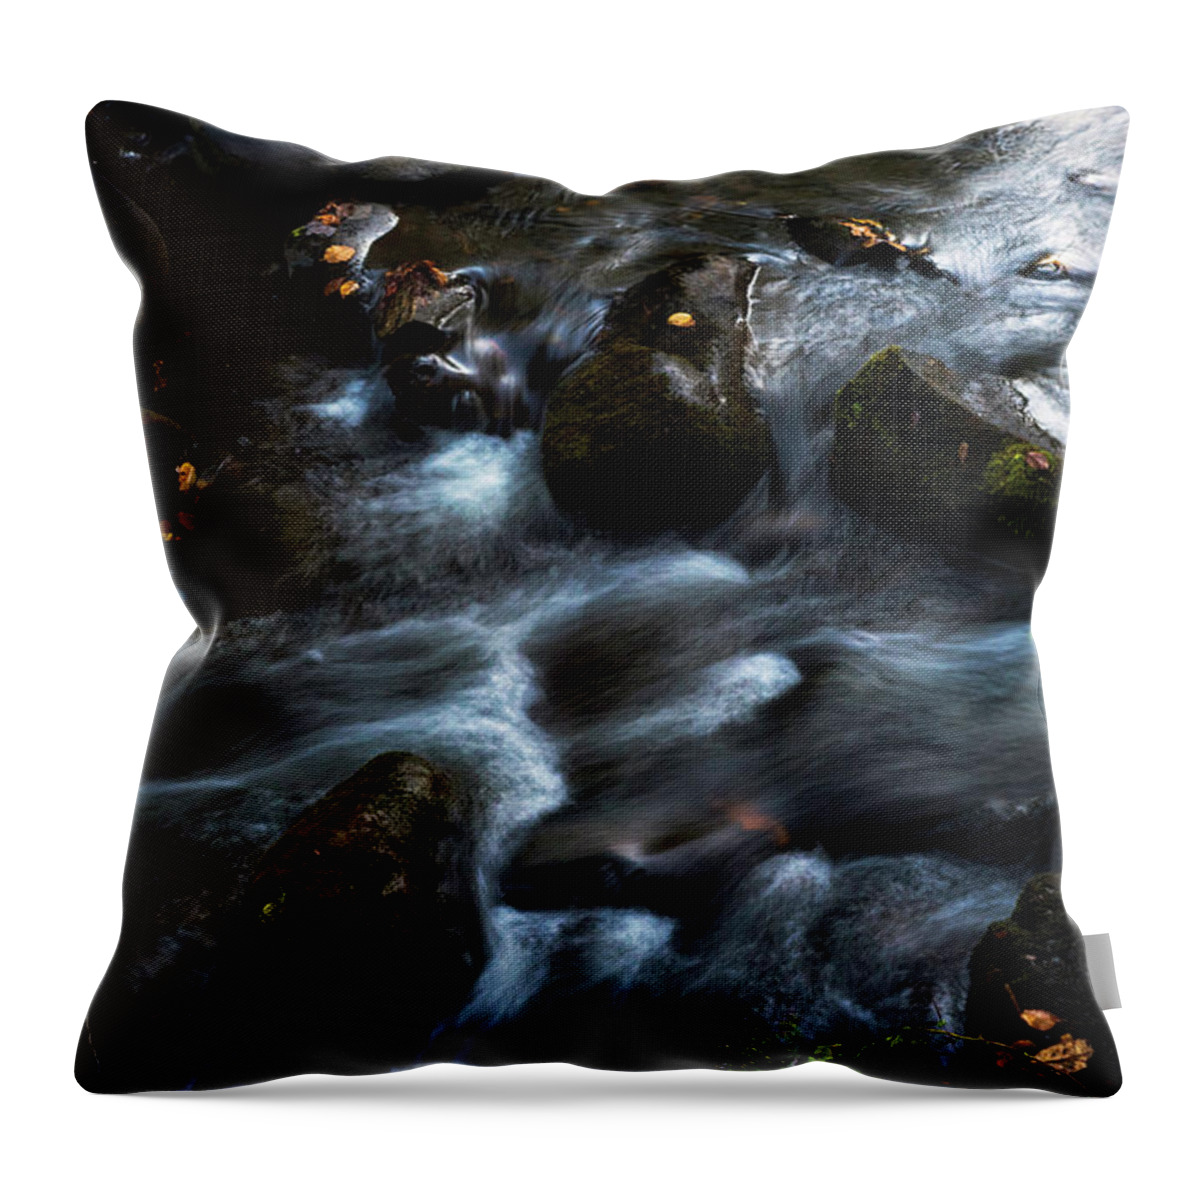 Rocks Throw Pillow featuring the photograph Rushing Stream by Norman Reid